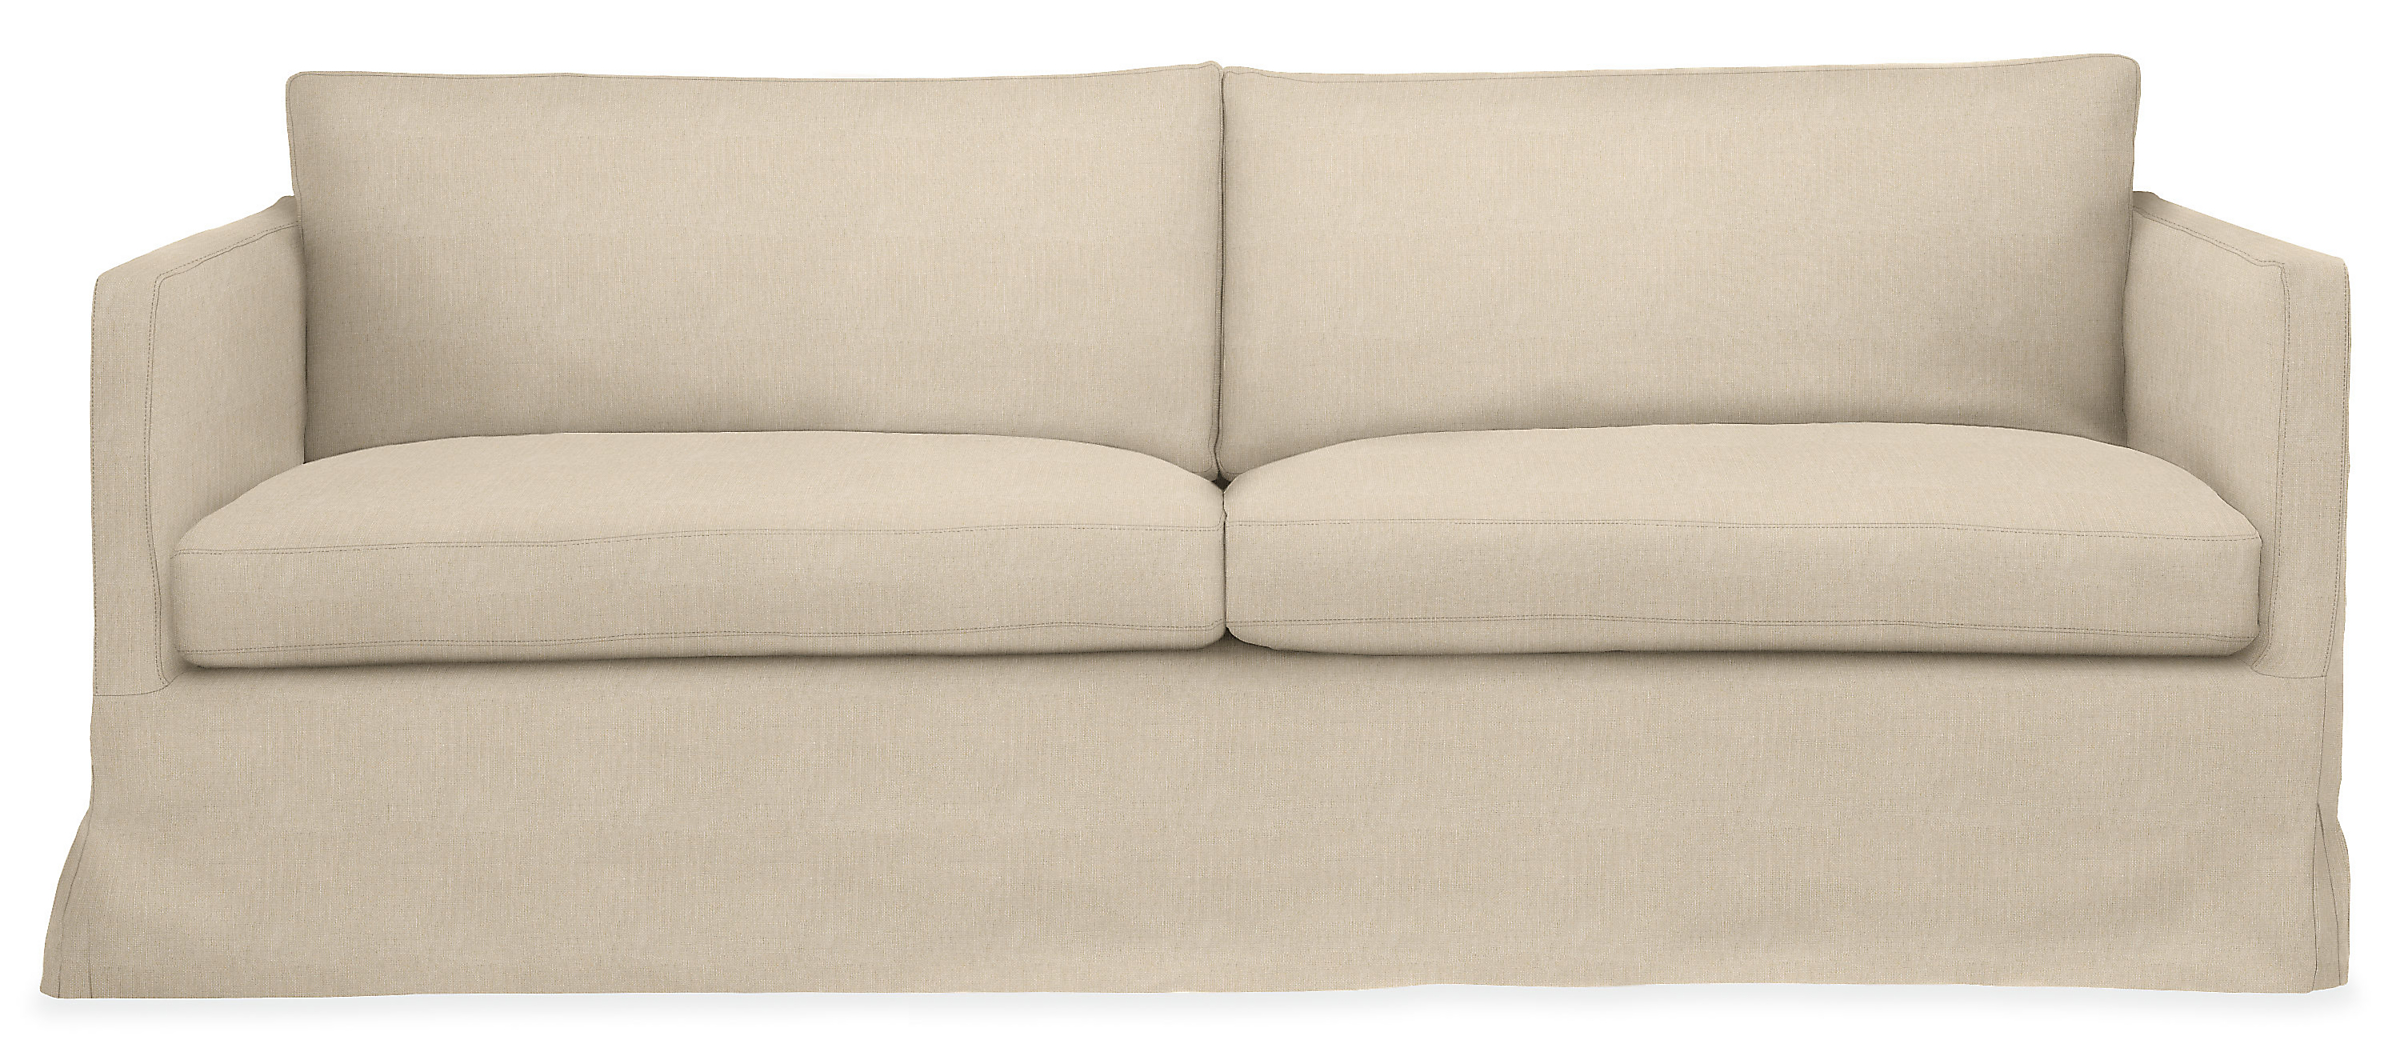 Janus Slipcover for 84" Two-Cushion Sofa in Chalet Natural